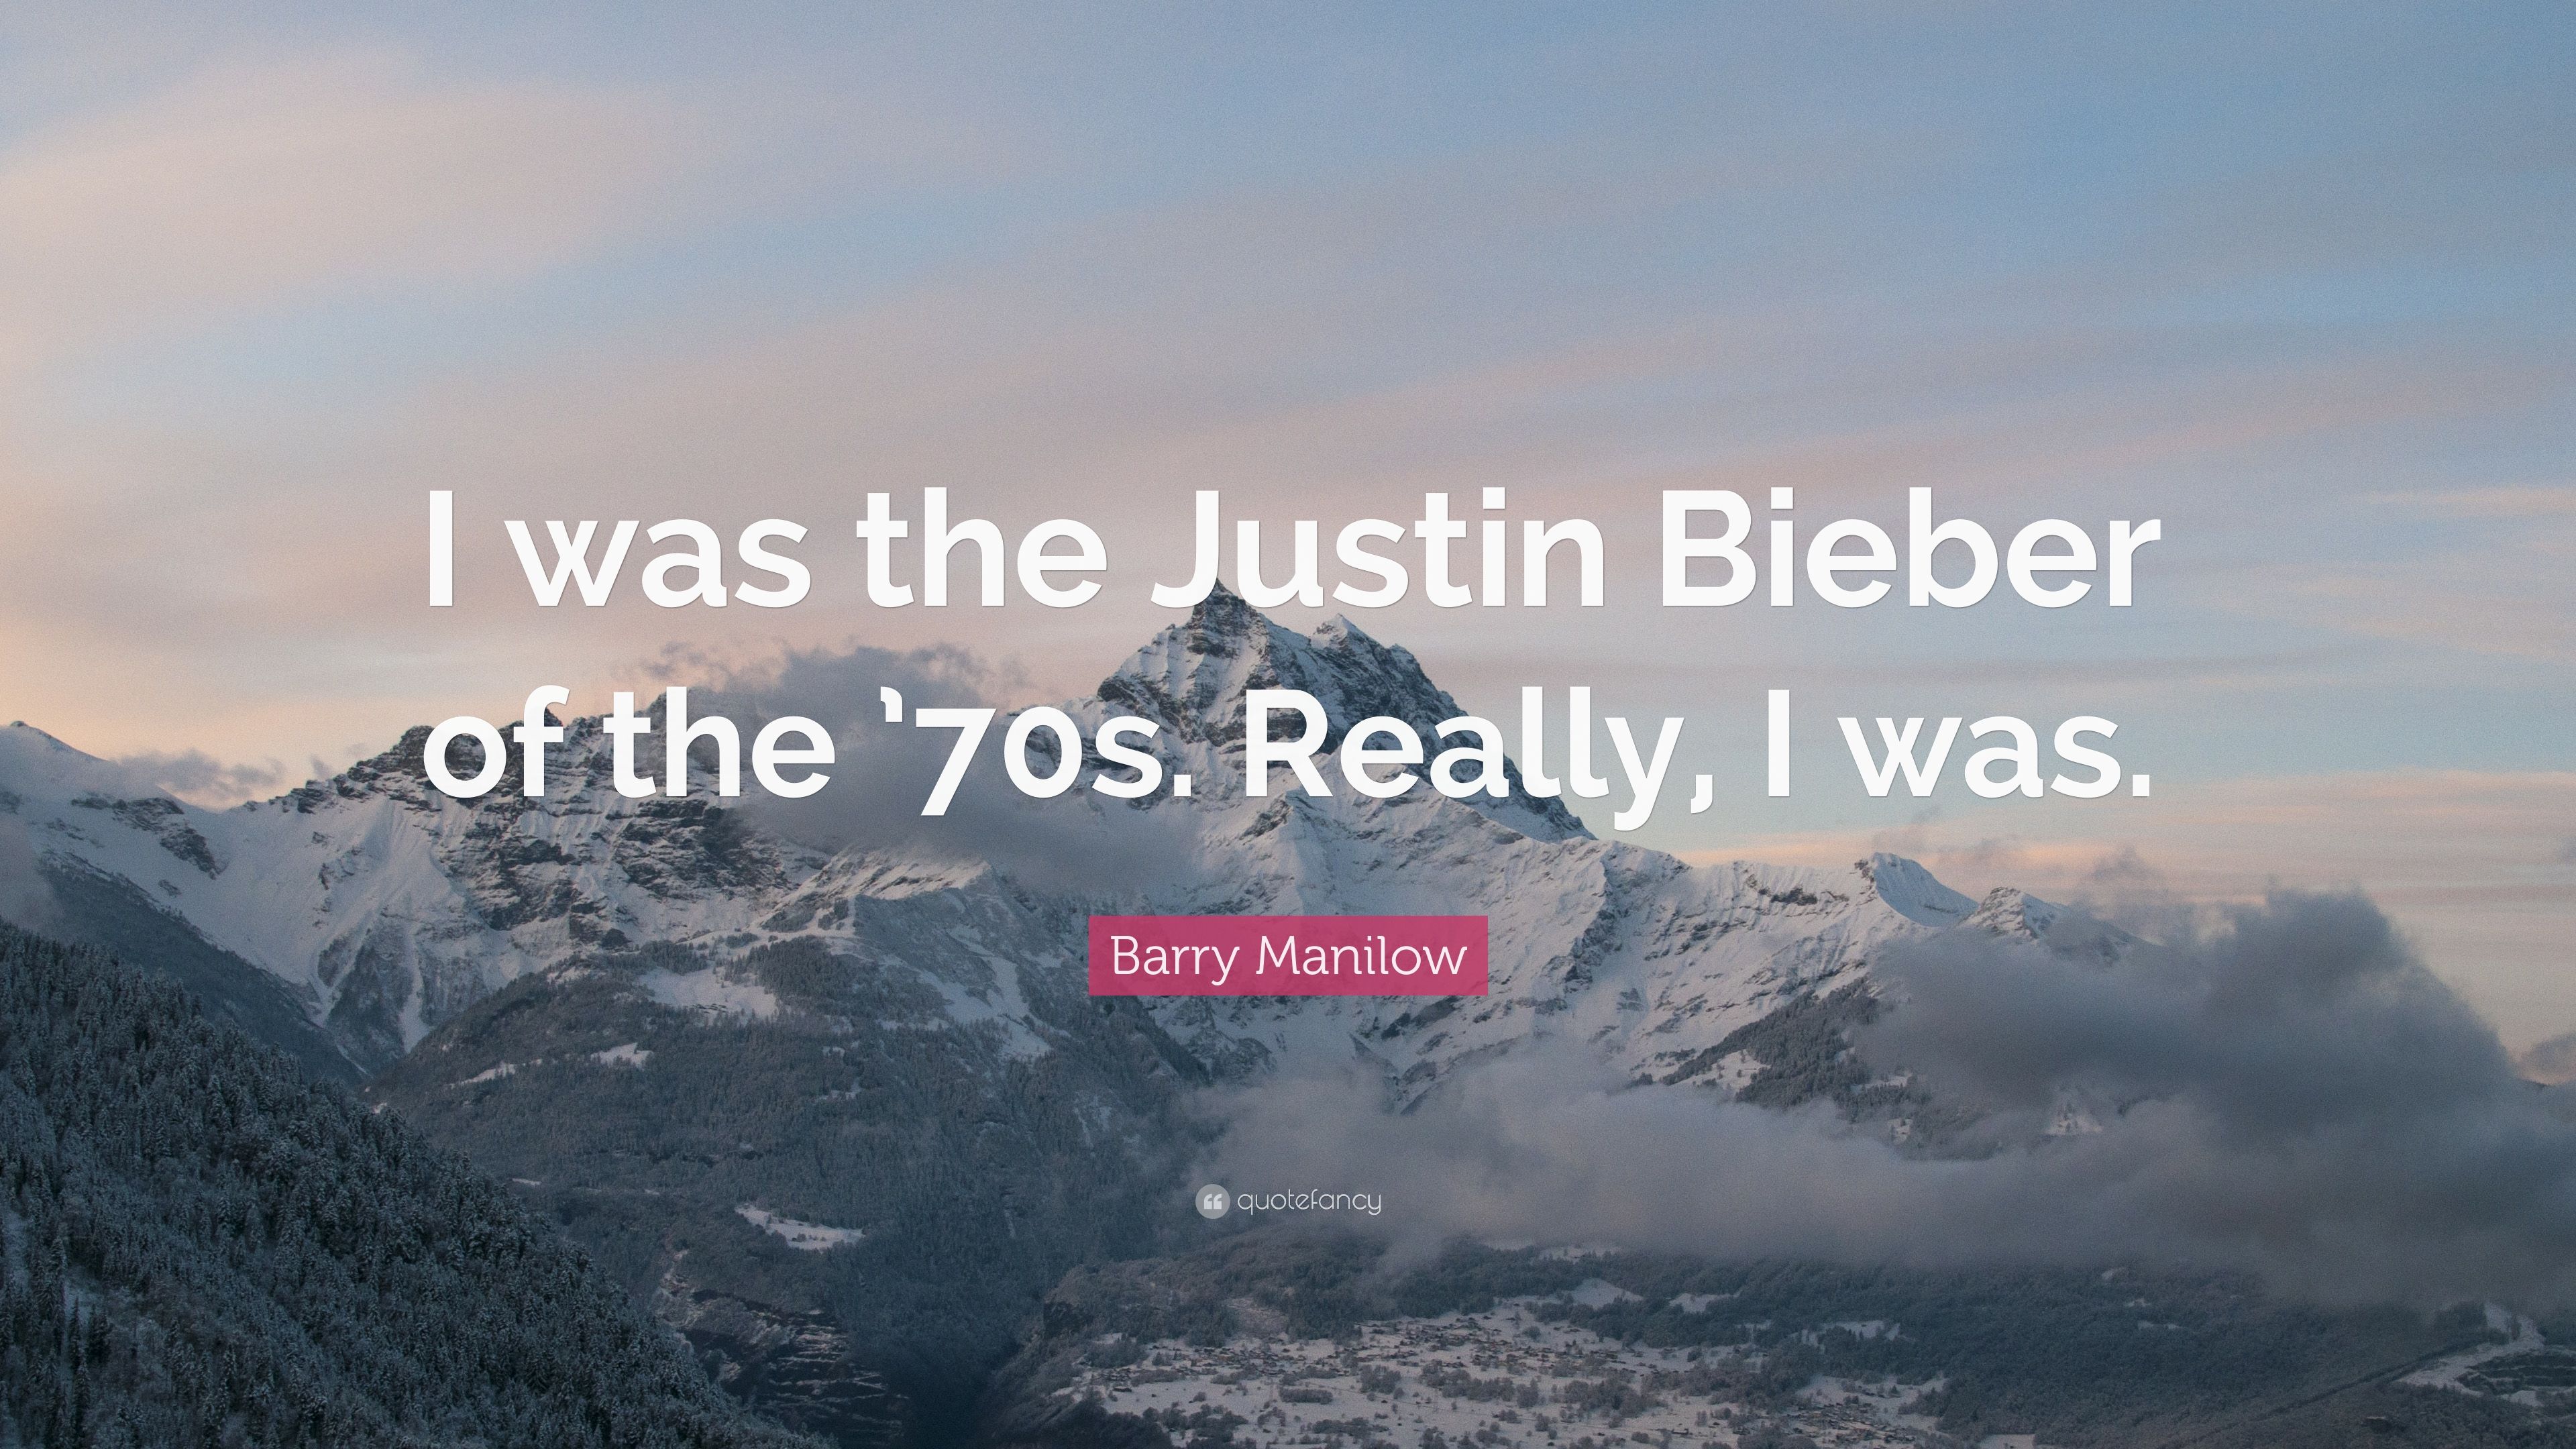 Barry Manilow Quote: “I was the Justin Bieber of the '70s. Really, I